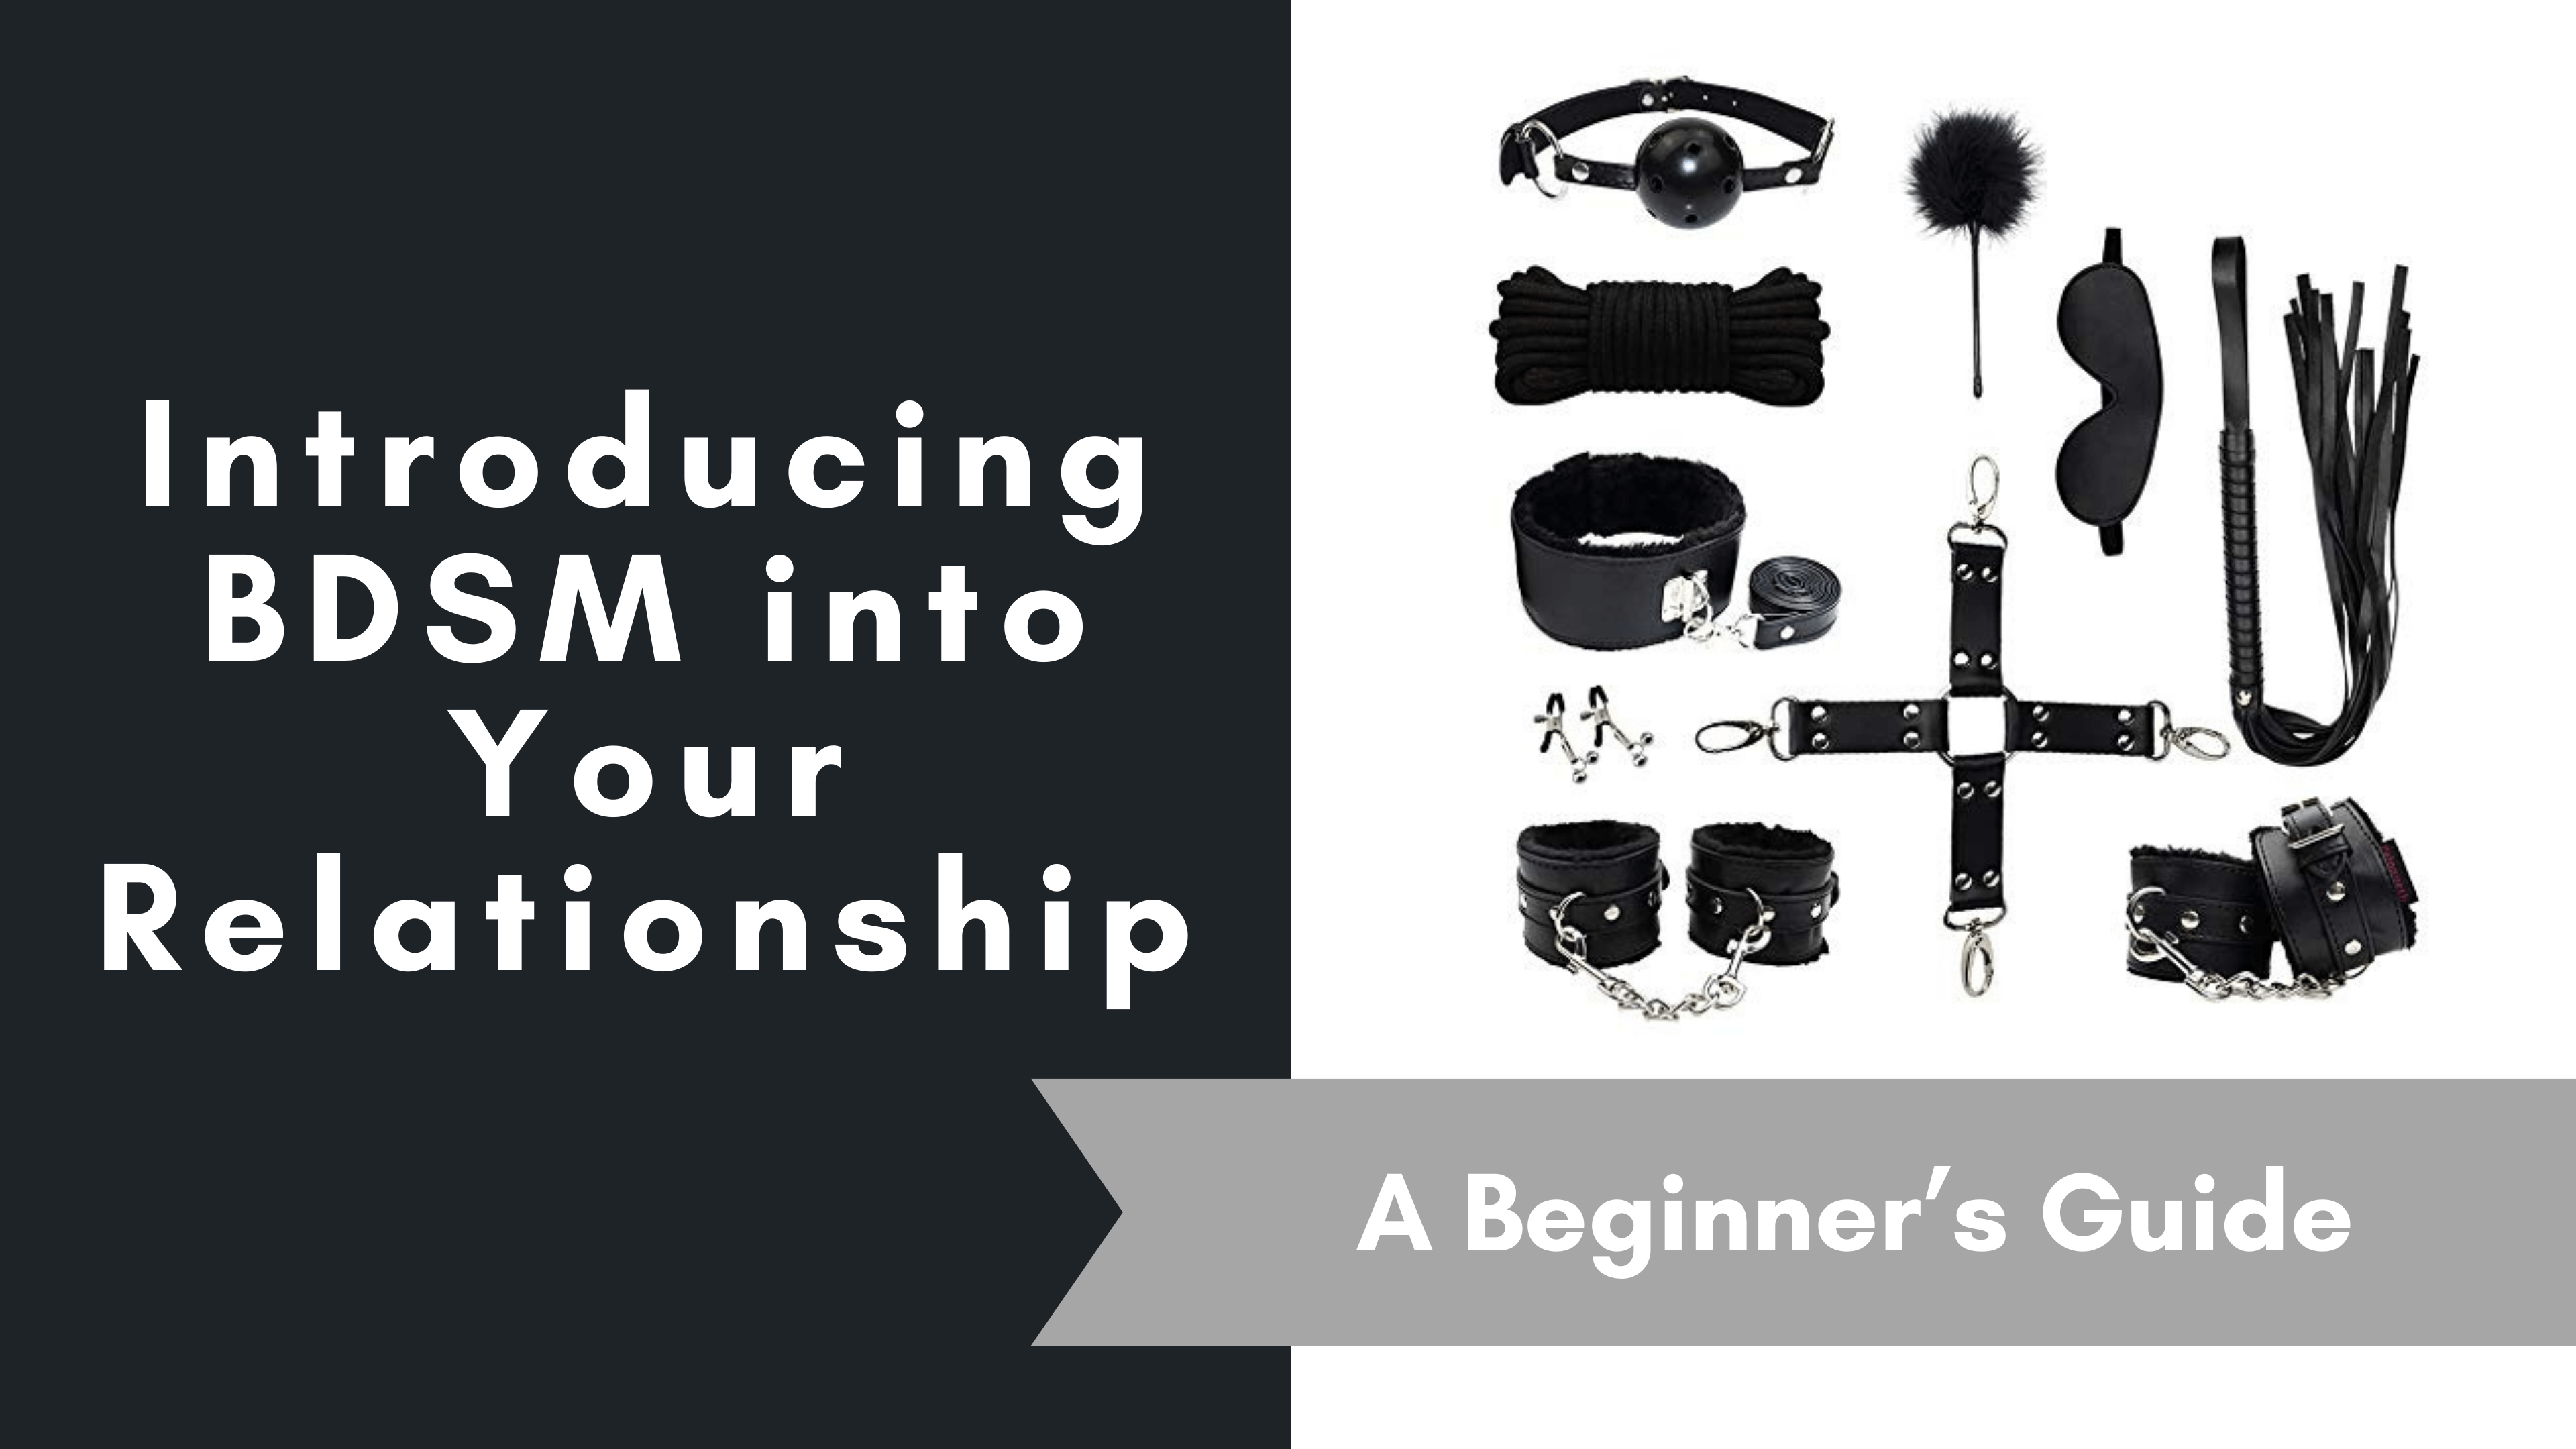 Introducing BDSM into Your Relationship – A Beginner’s Guide, April 2021